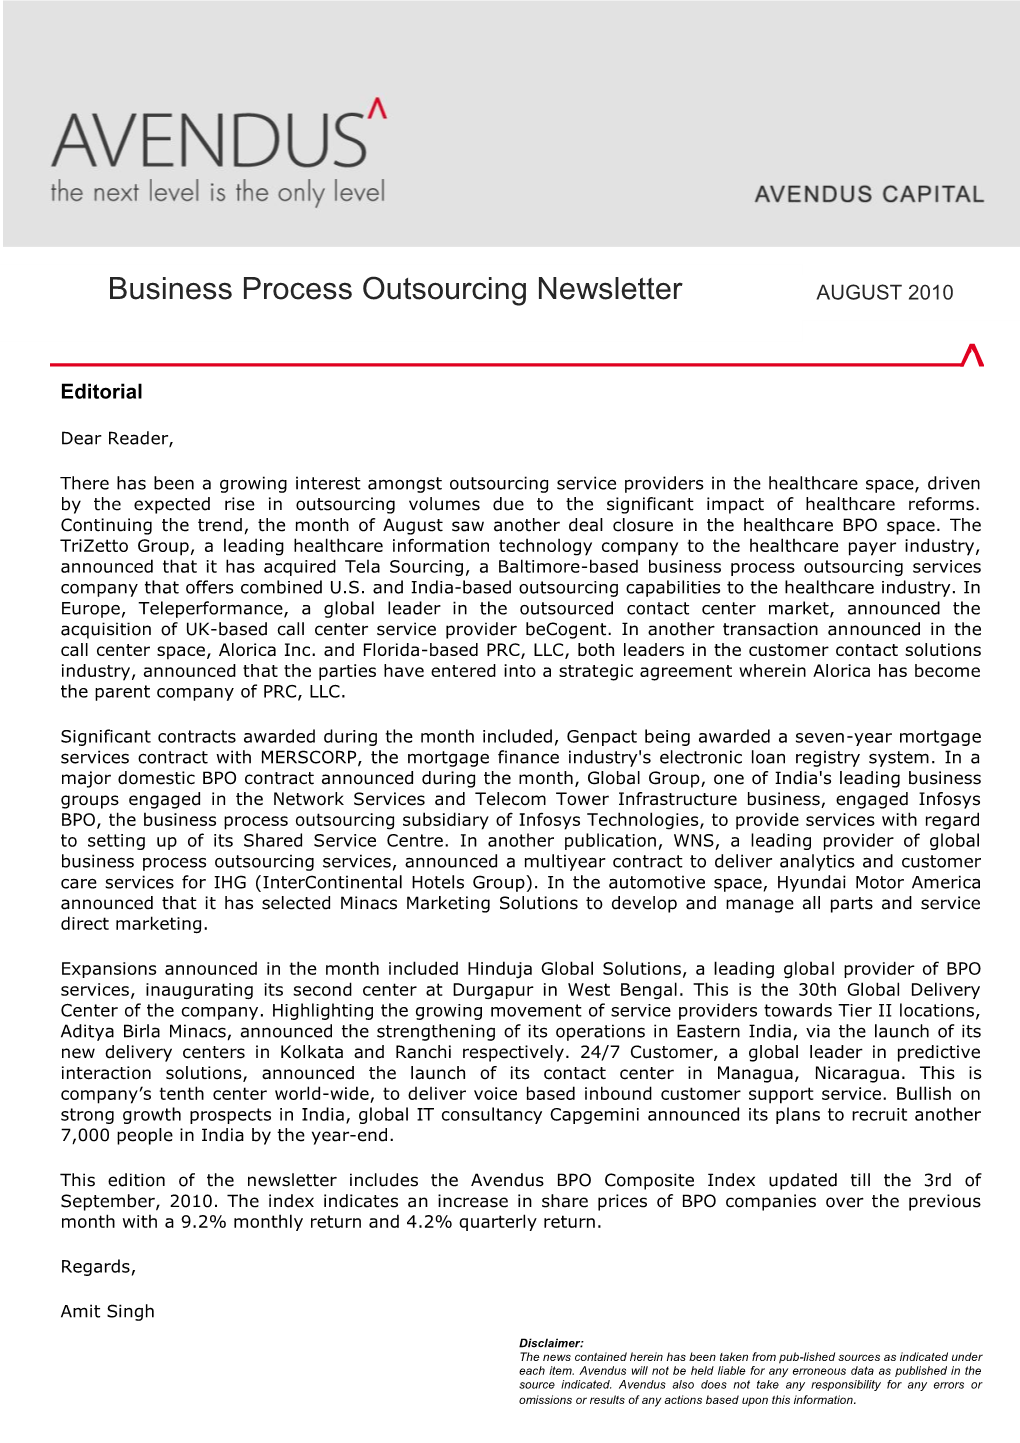 Business Process Outsourcing Newsletter AUGUST 2010